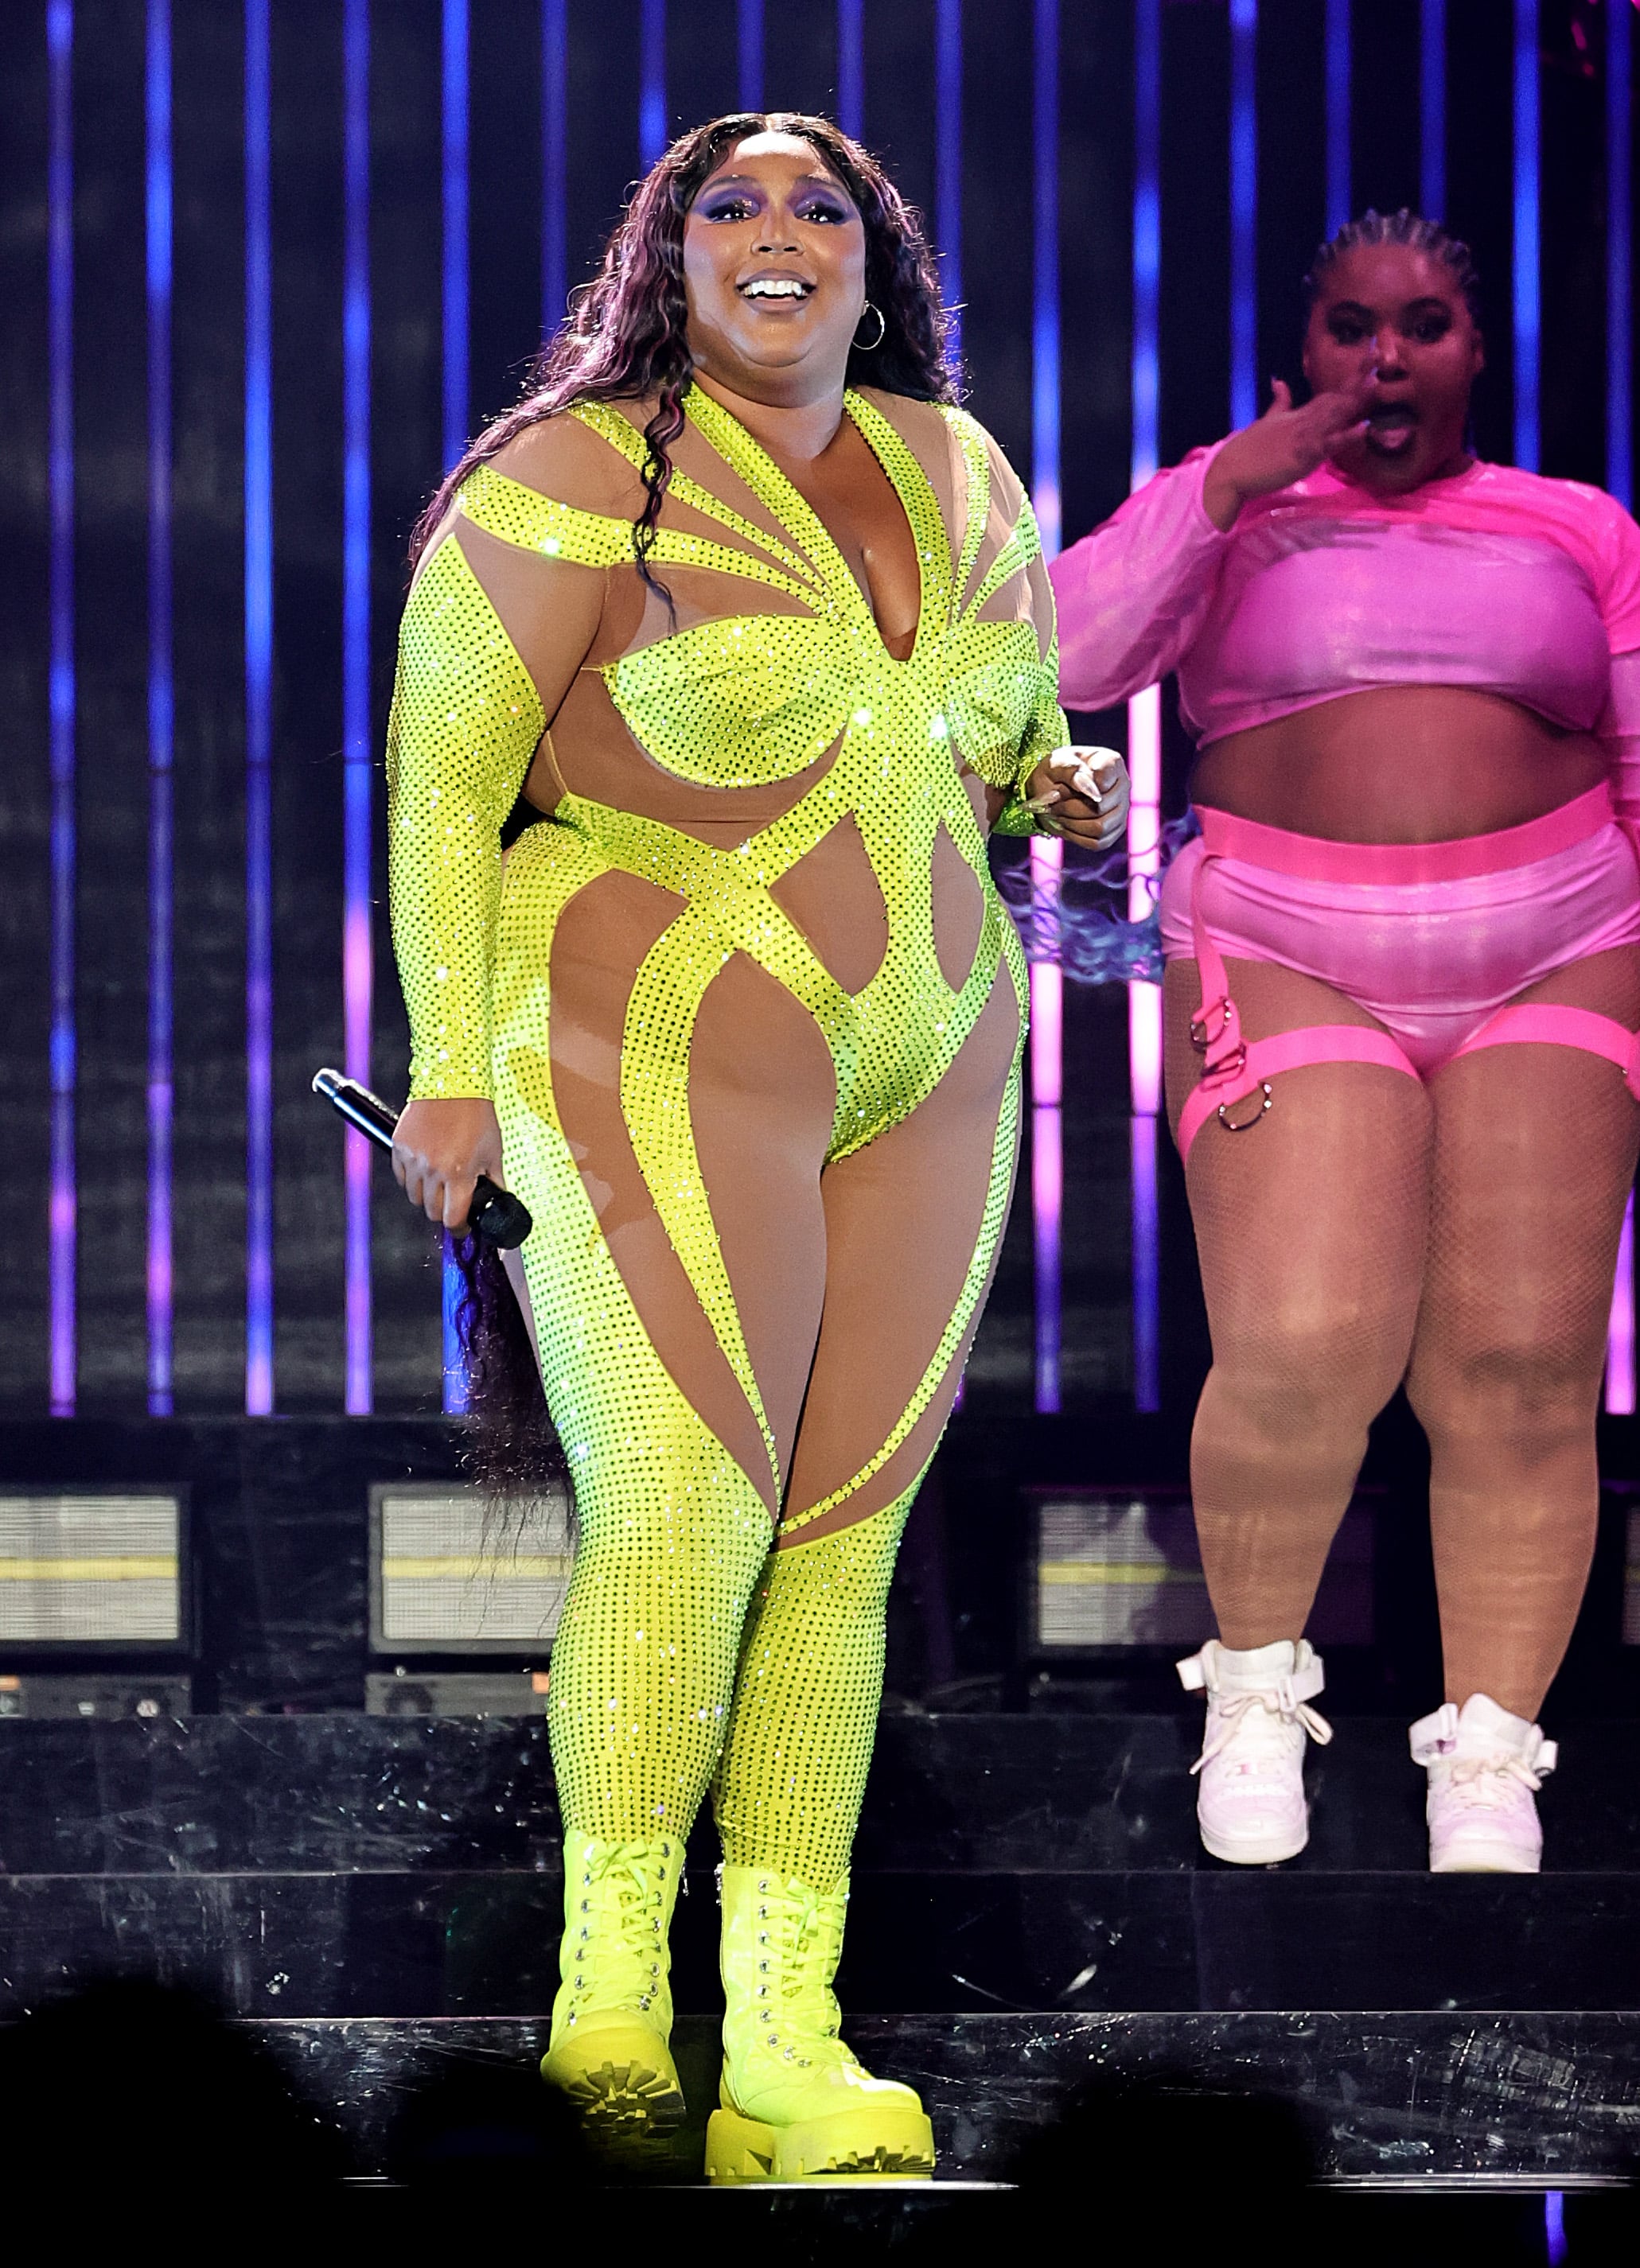 Lizzo Sparkled in Pink Jumpsuit and Feathers for NYC Show